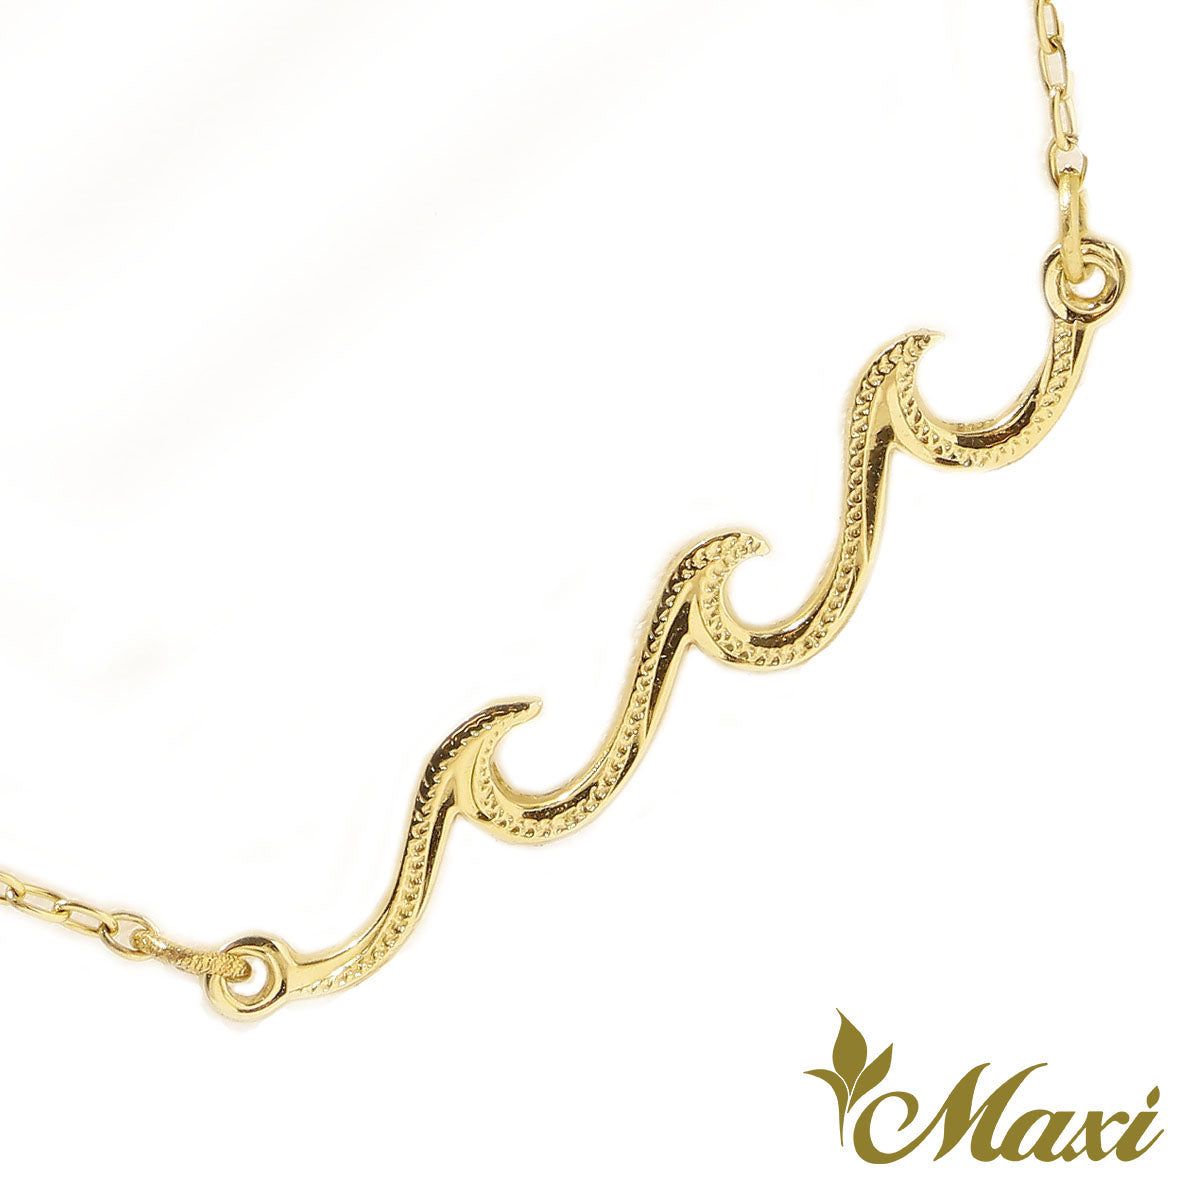 14K Gold] Triple Nalu Wave Anklet*Made to order*Newest – Maxi 